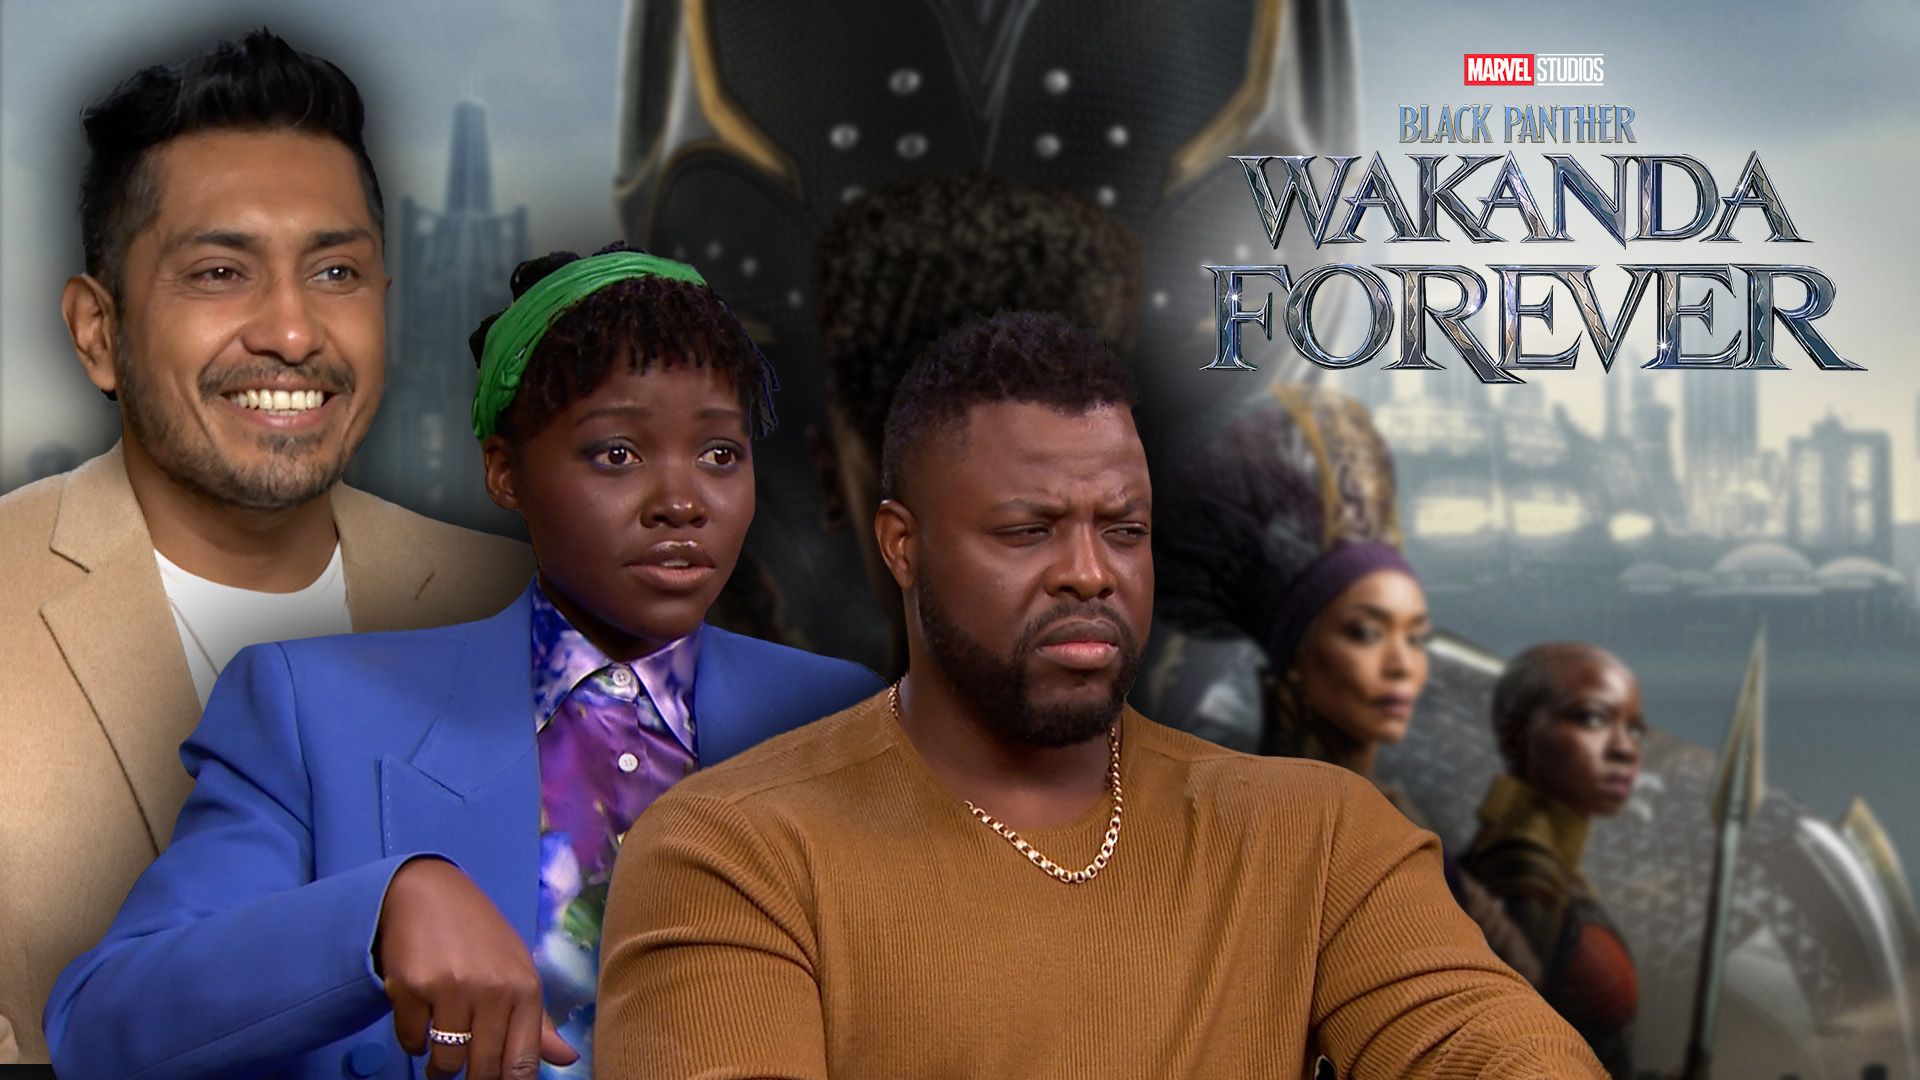 Black Panther 2 was father-son story before Chadwick Boseman's death